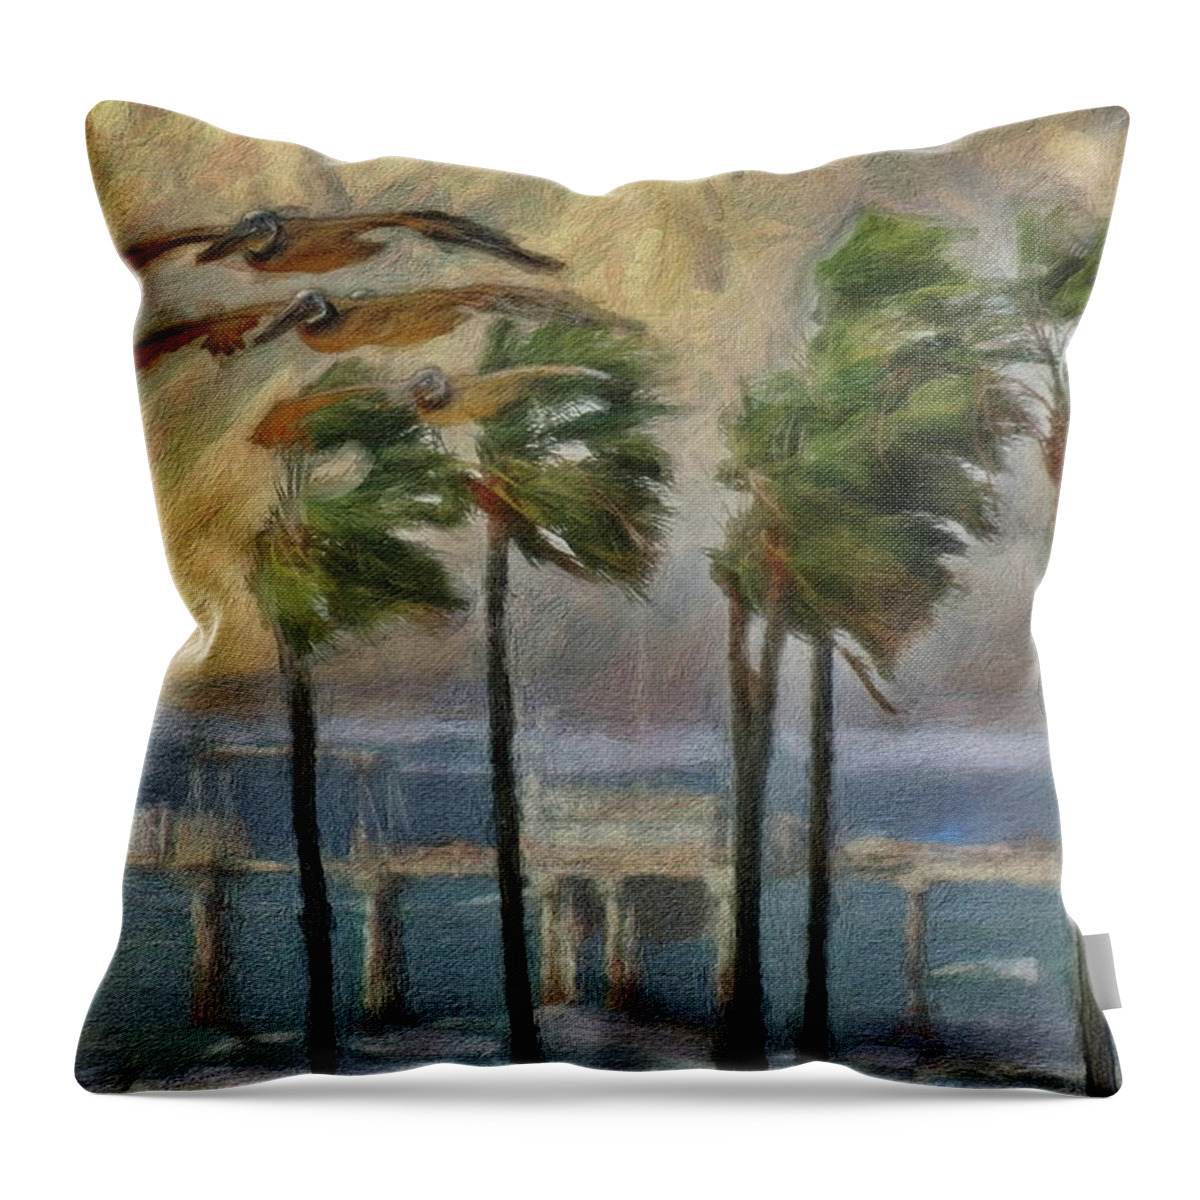 La Jolla Throw Pillow featuring the digital art A Windy Day at La Jolla Shores by Russ Harris